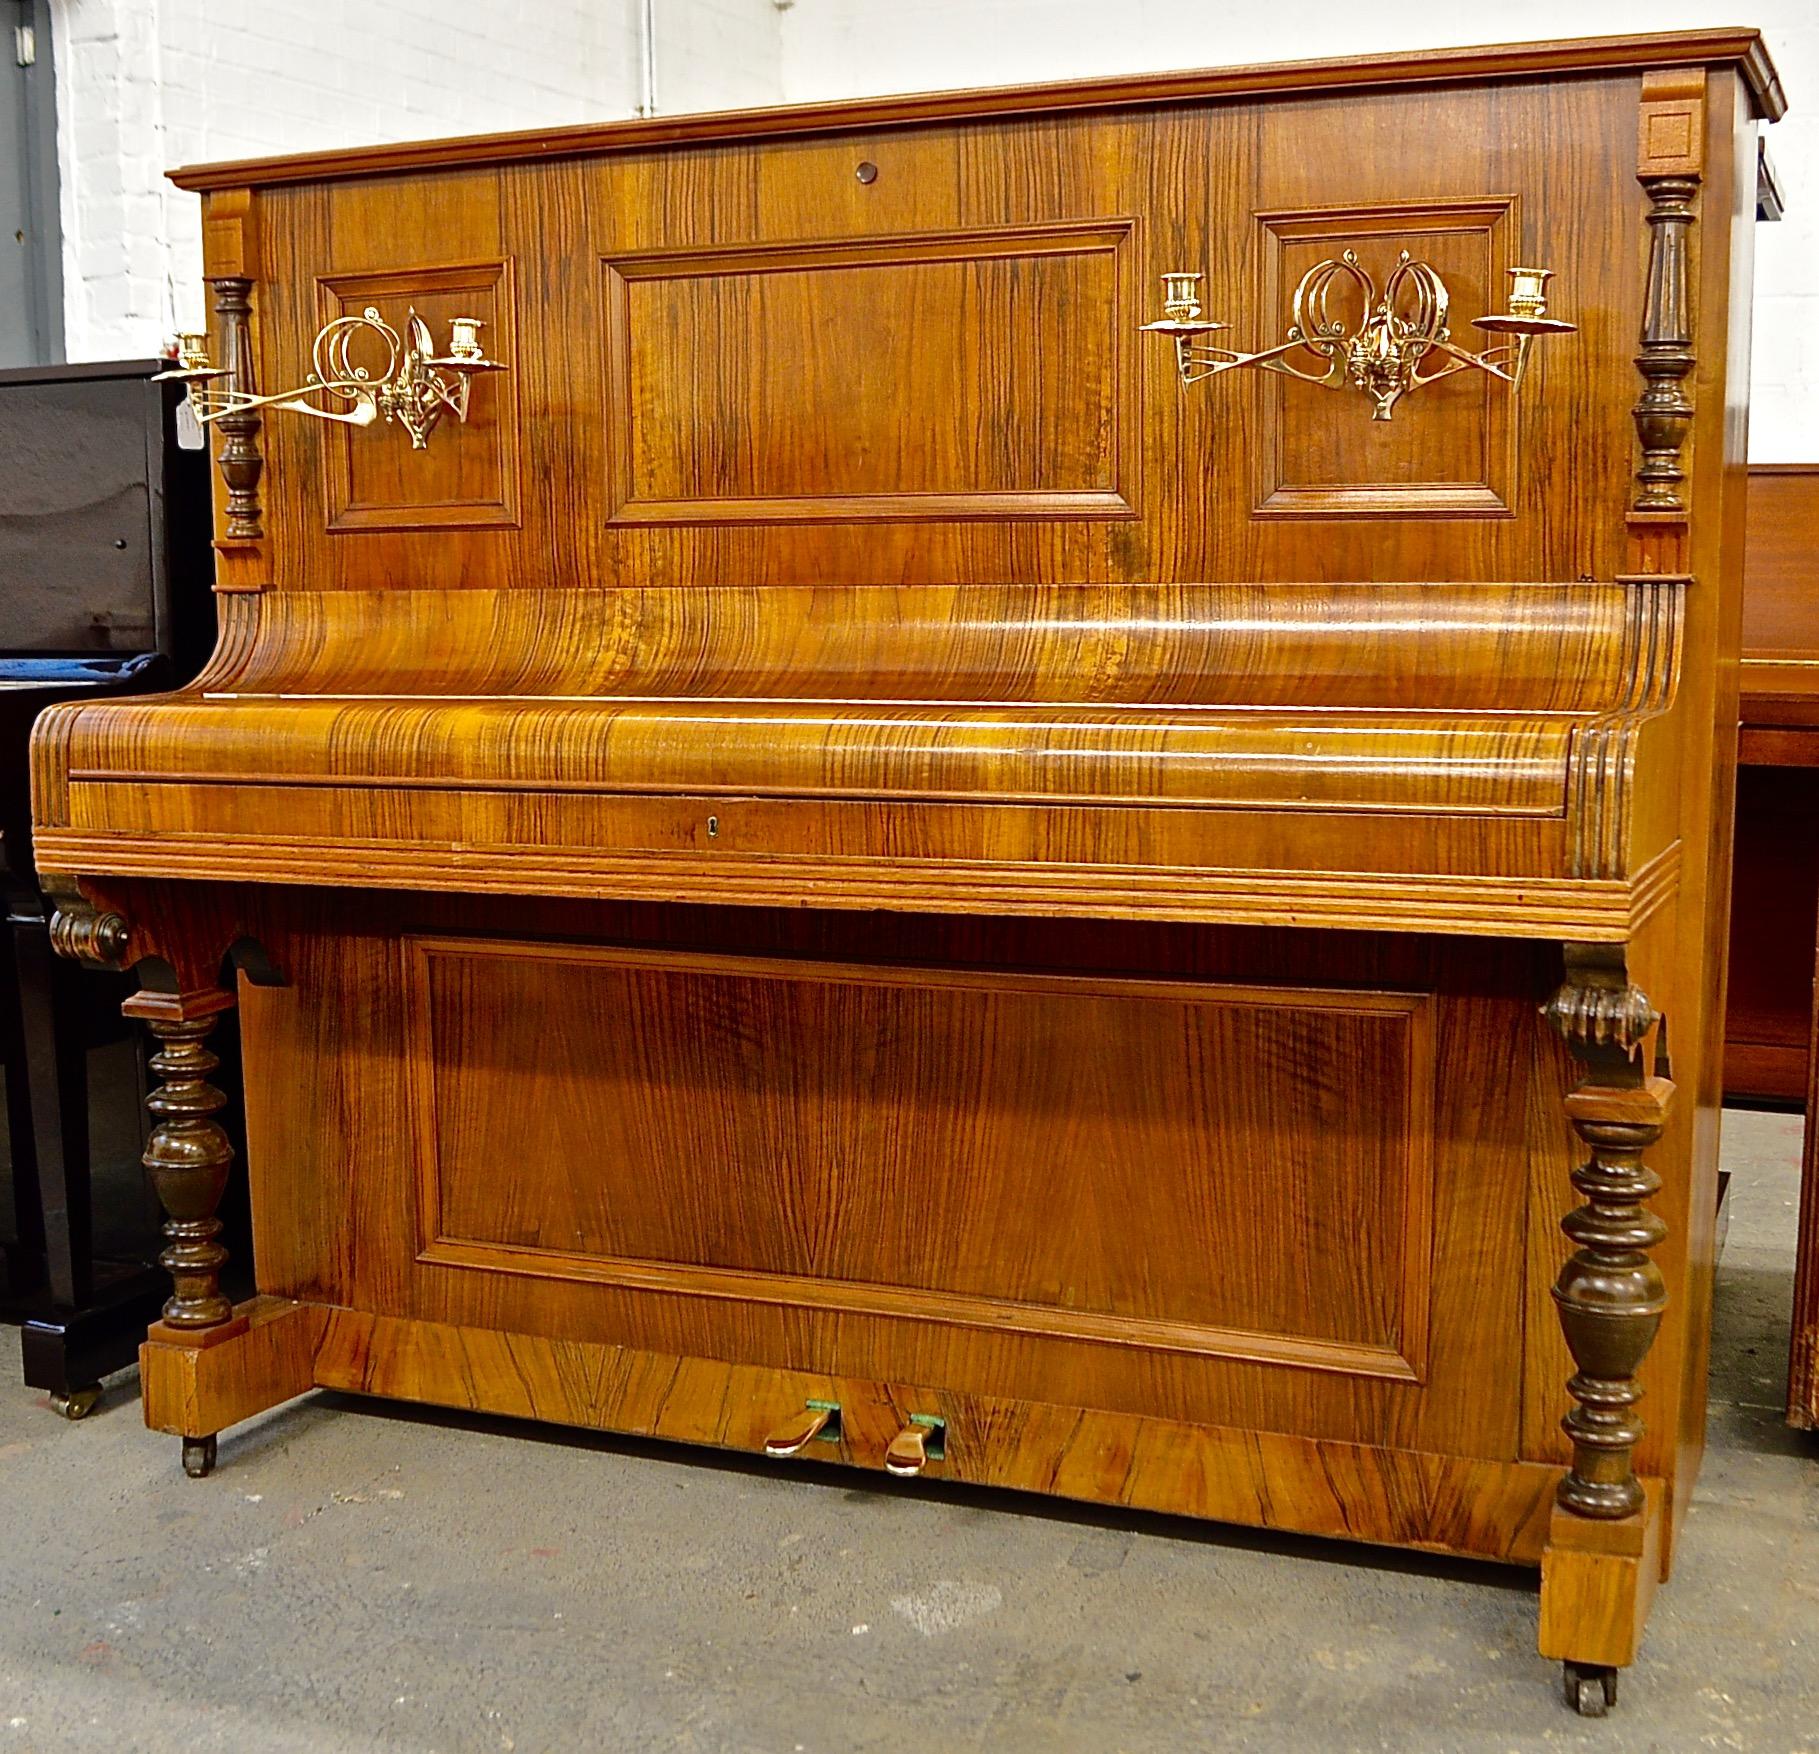 This is a very beautiful piano crafted by the German piano maker Himmel. The company was based in Berlin Germany, a region famous for piano making, this company embodied everything that is great in piano making - handcrafted tradition using the